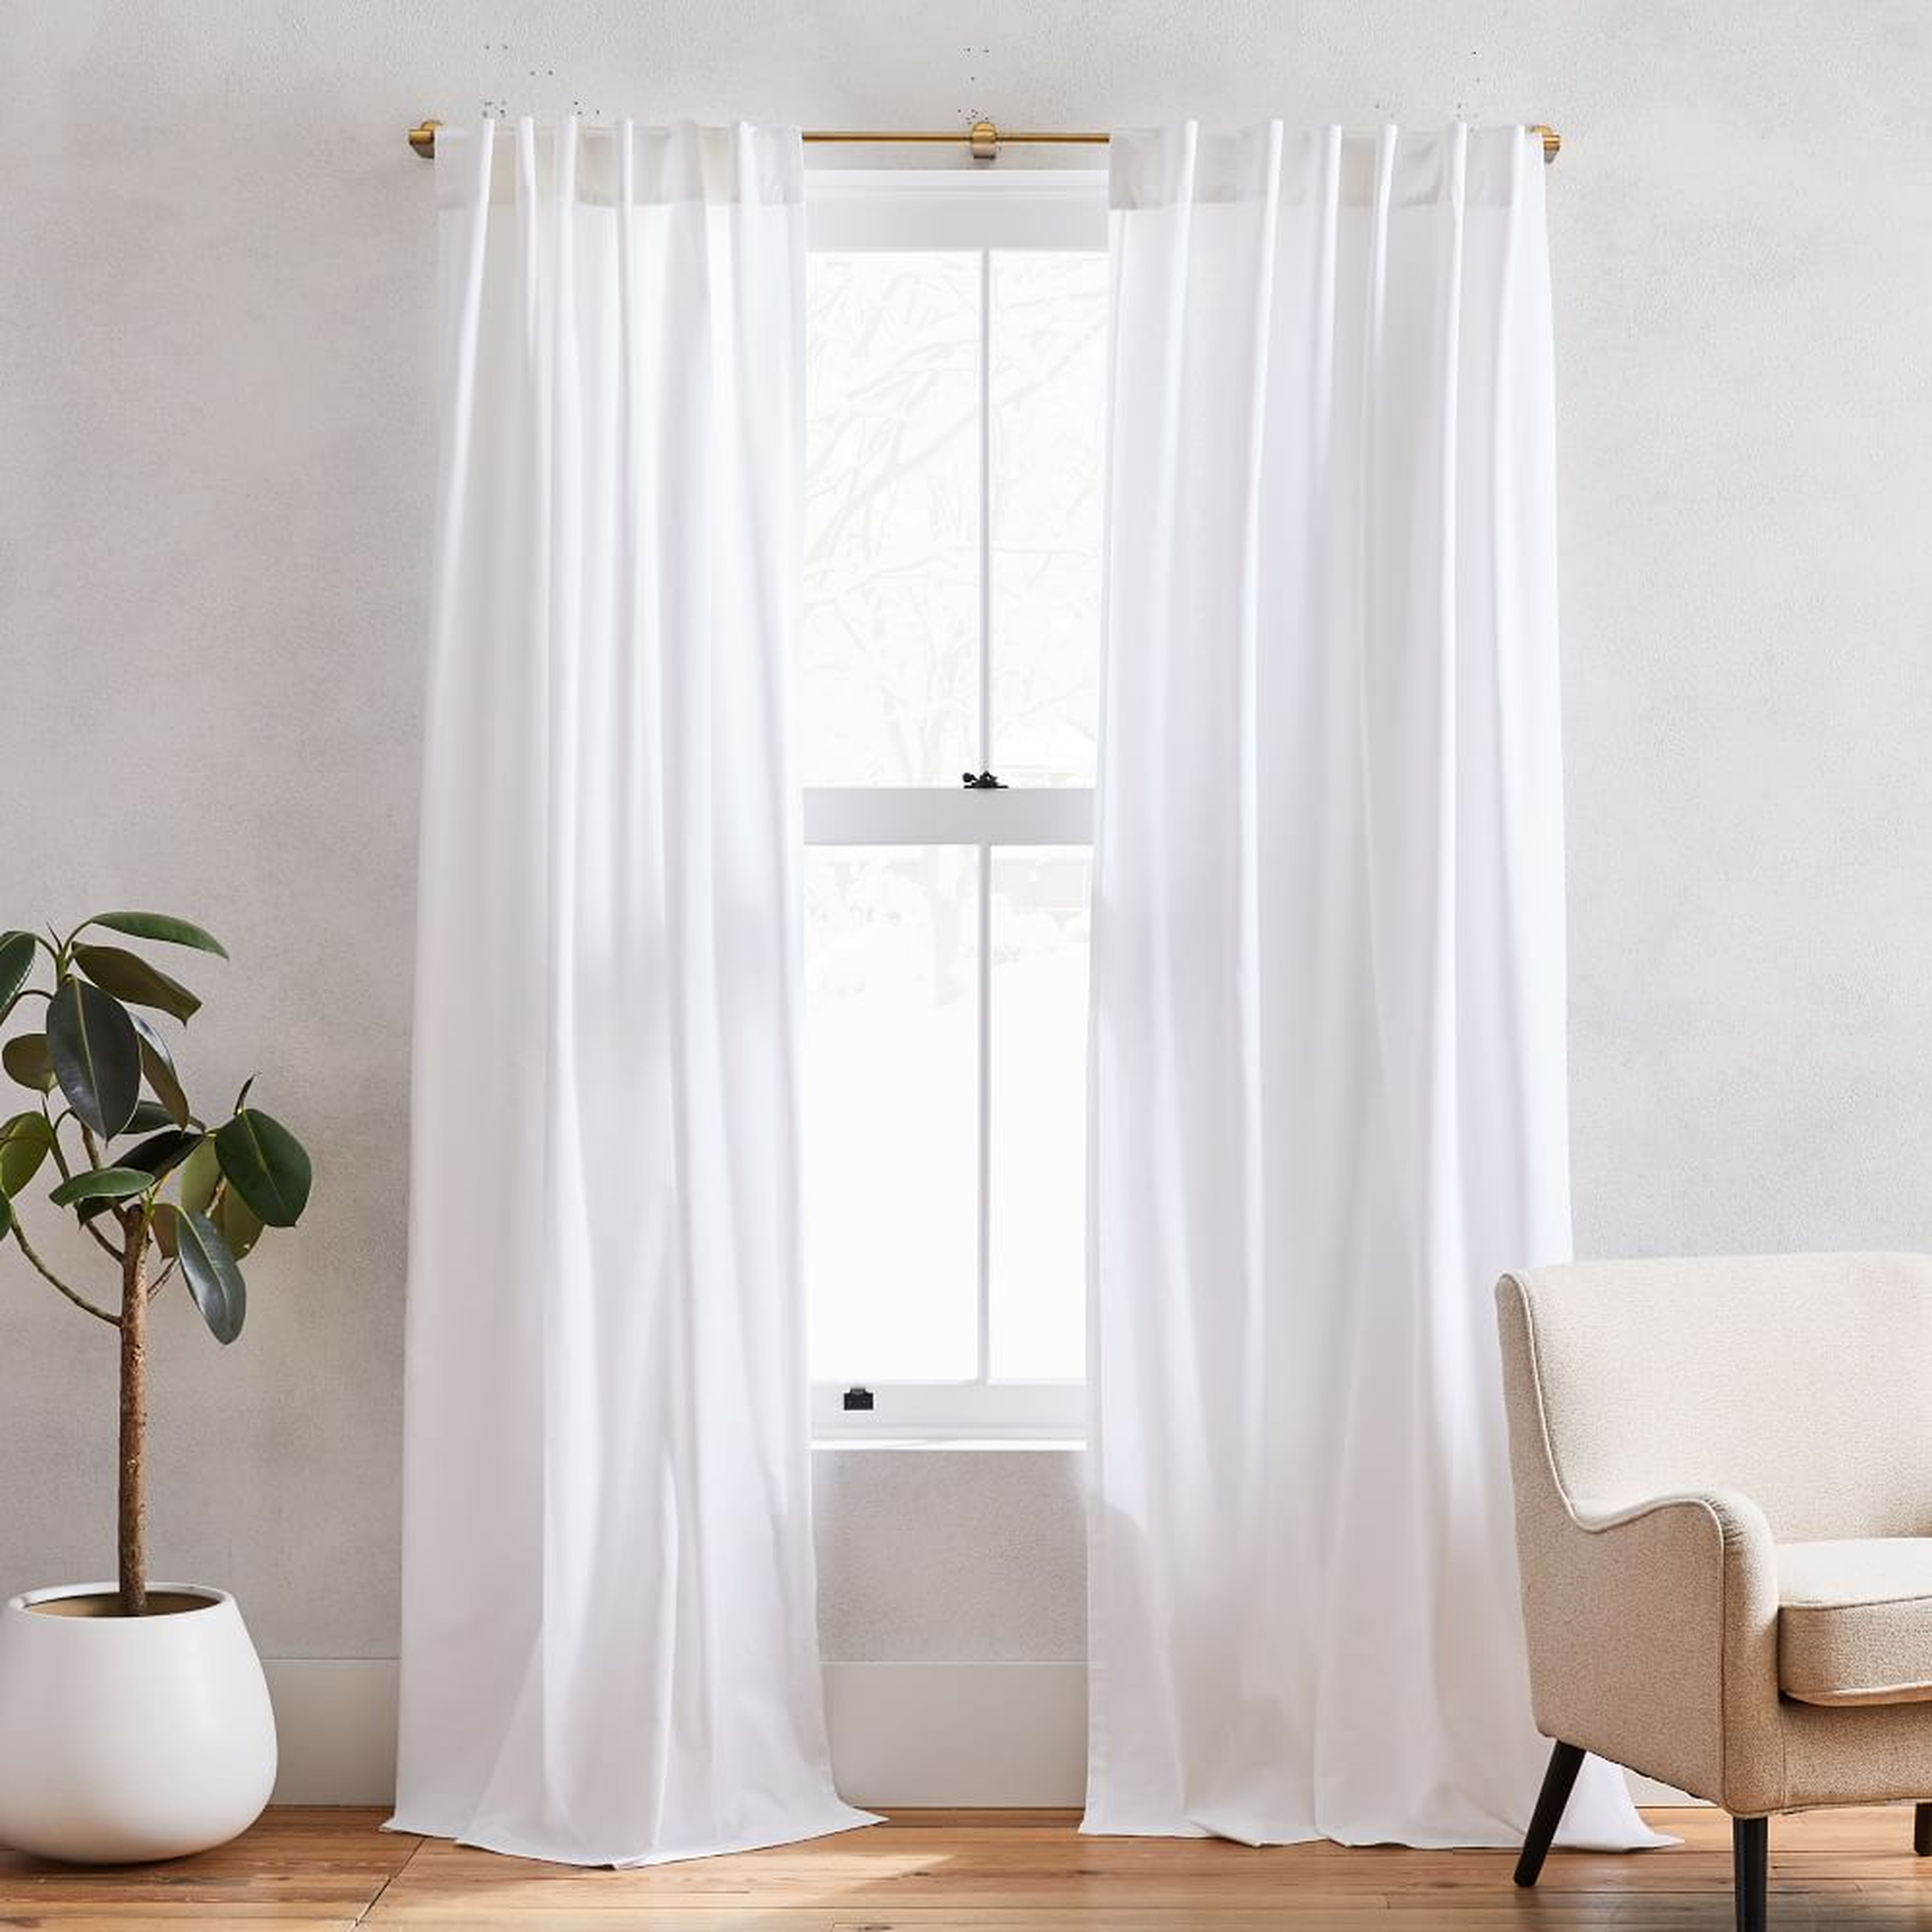 Cotton Canvas Curtain with Cotton Lining, White, 48"x84", Set of 2 - West Elm